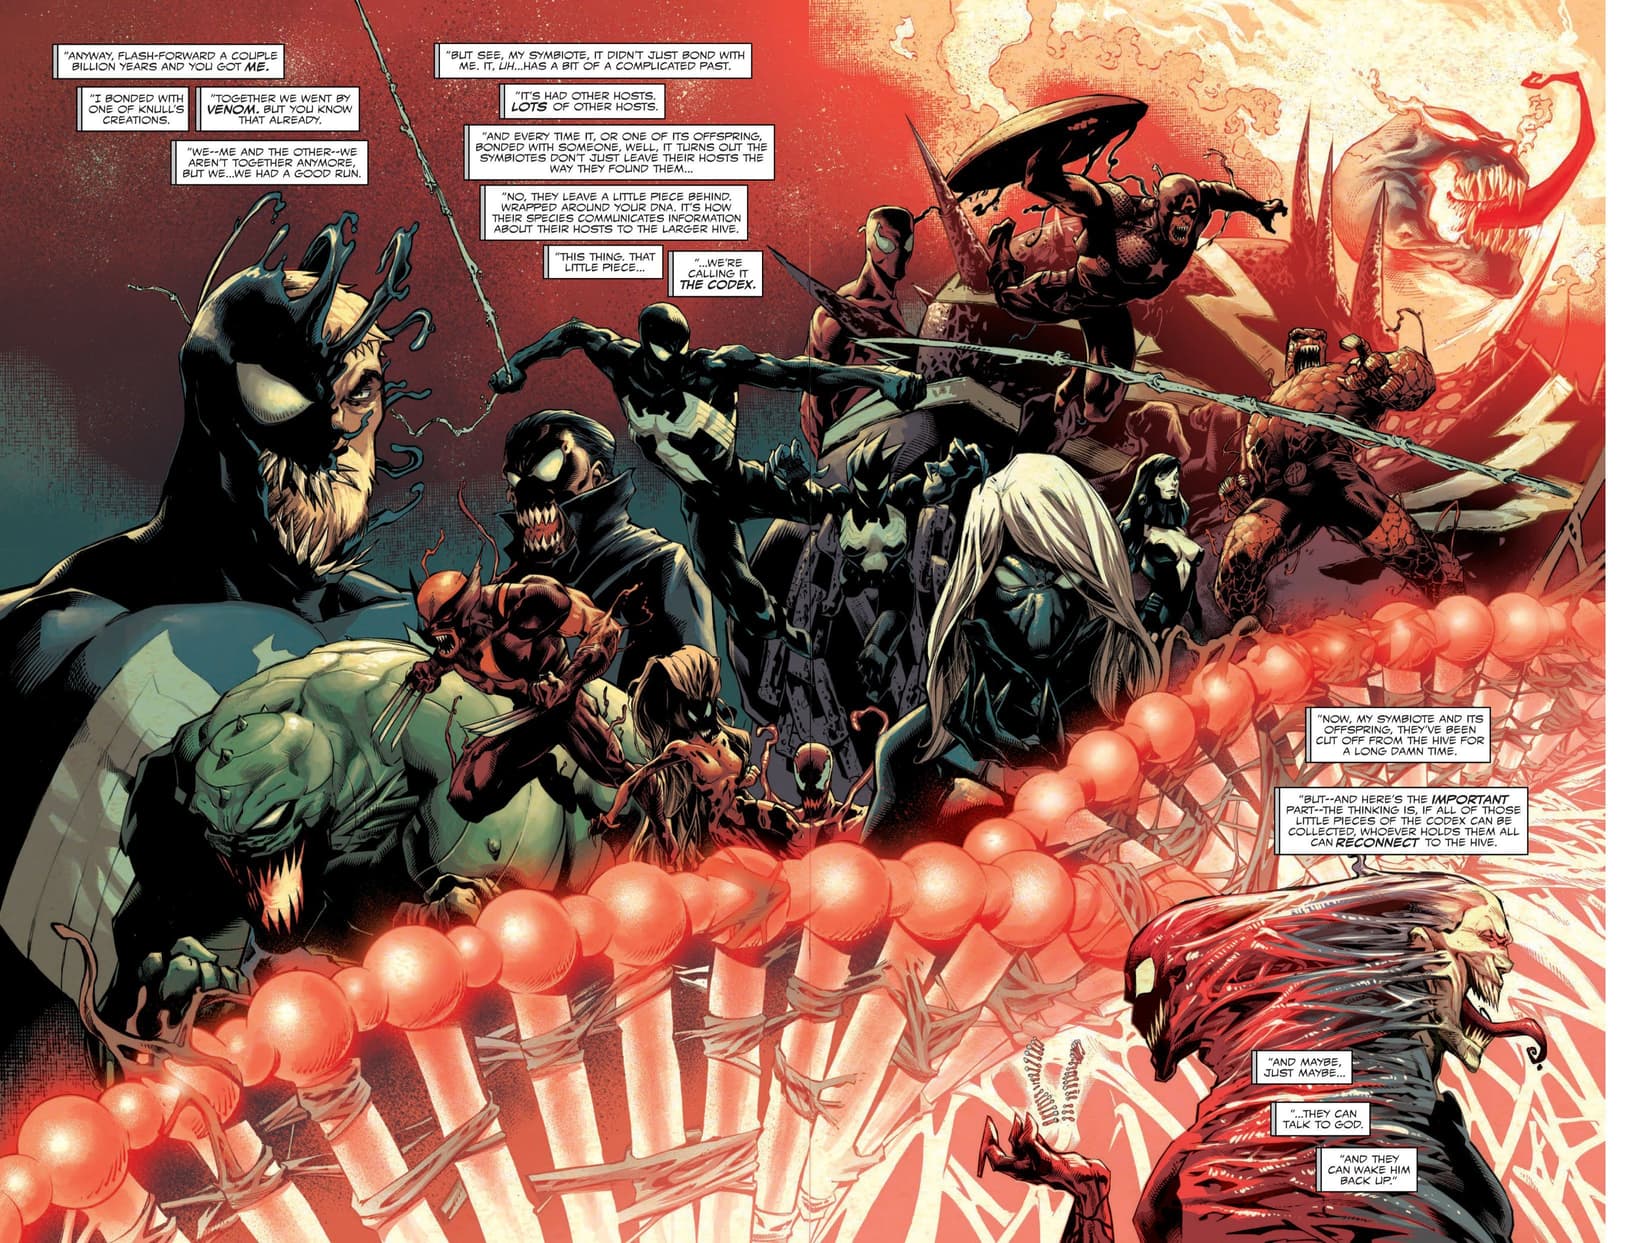 ABSOLUTE CARNAGE #1 interior pencils by Ryan Stegman